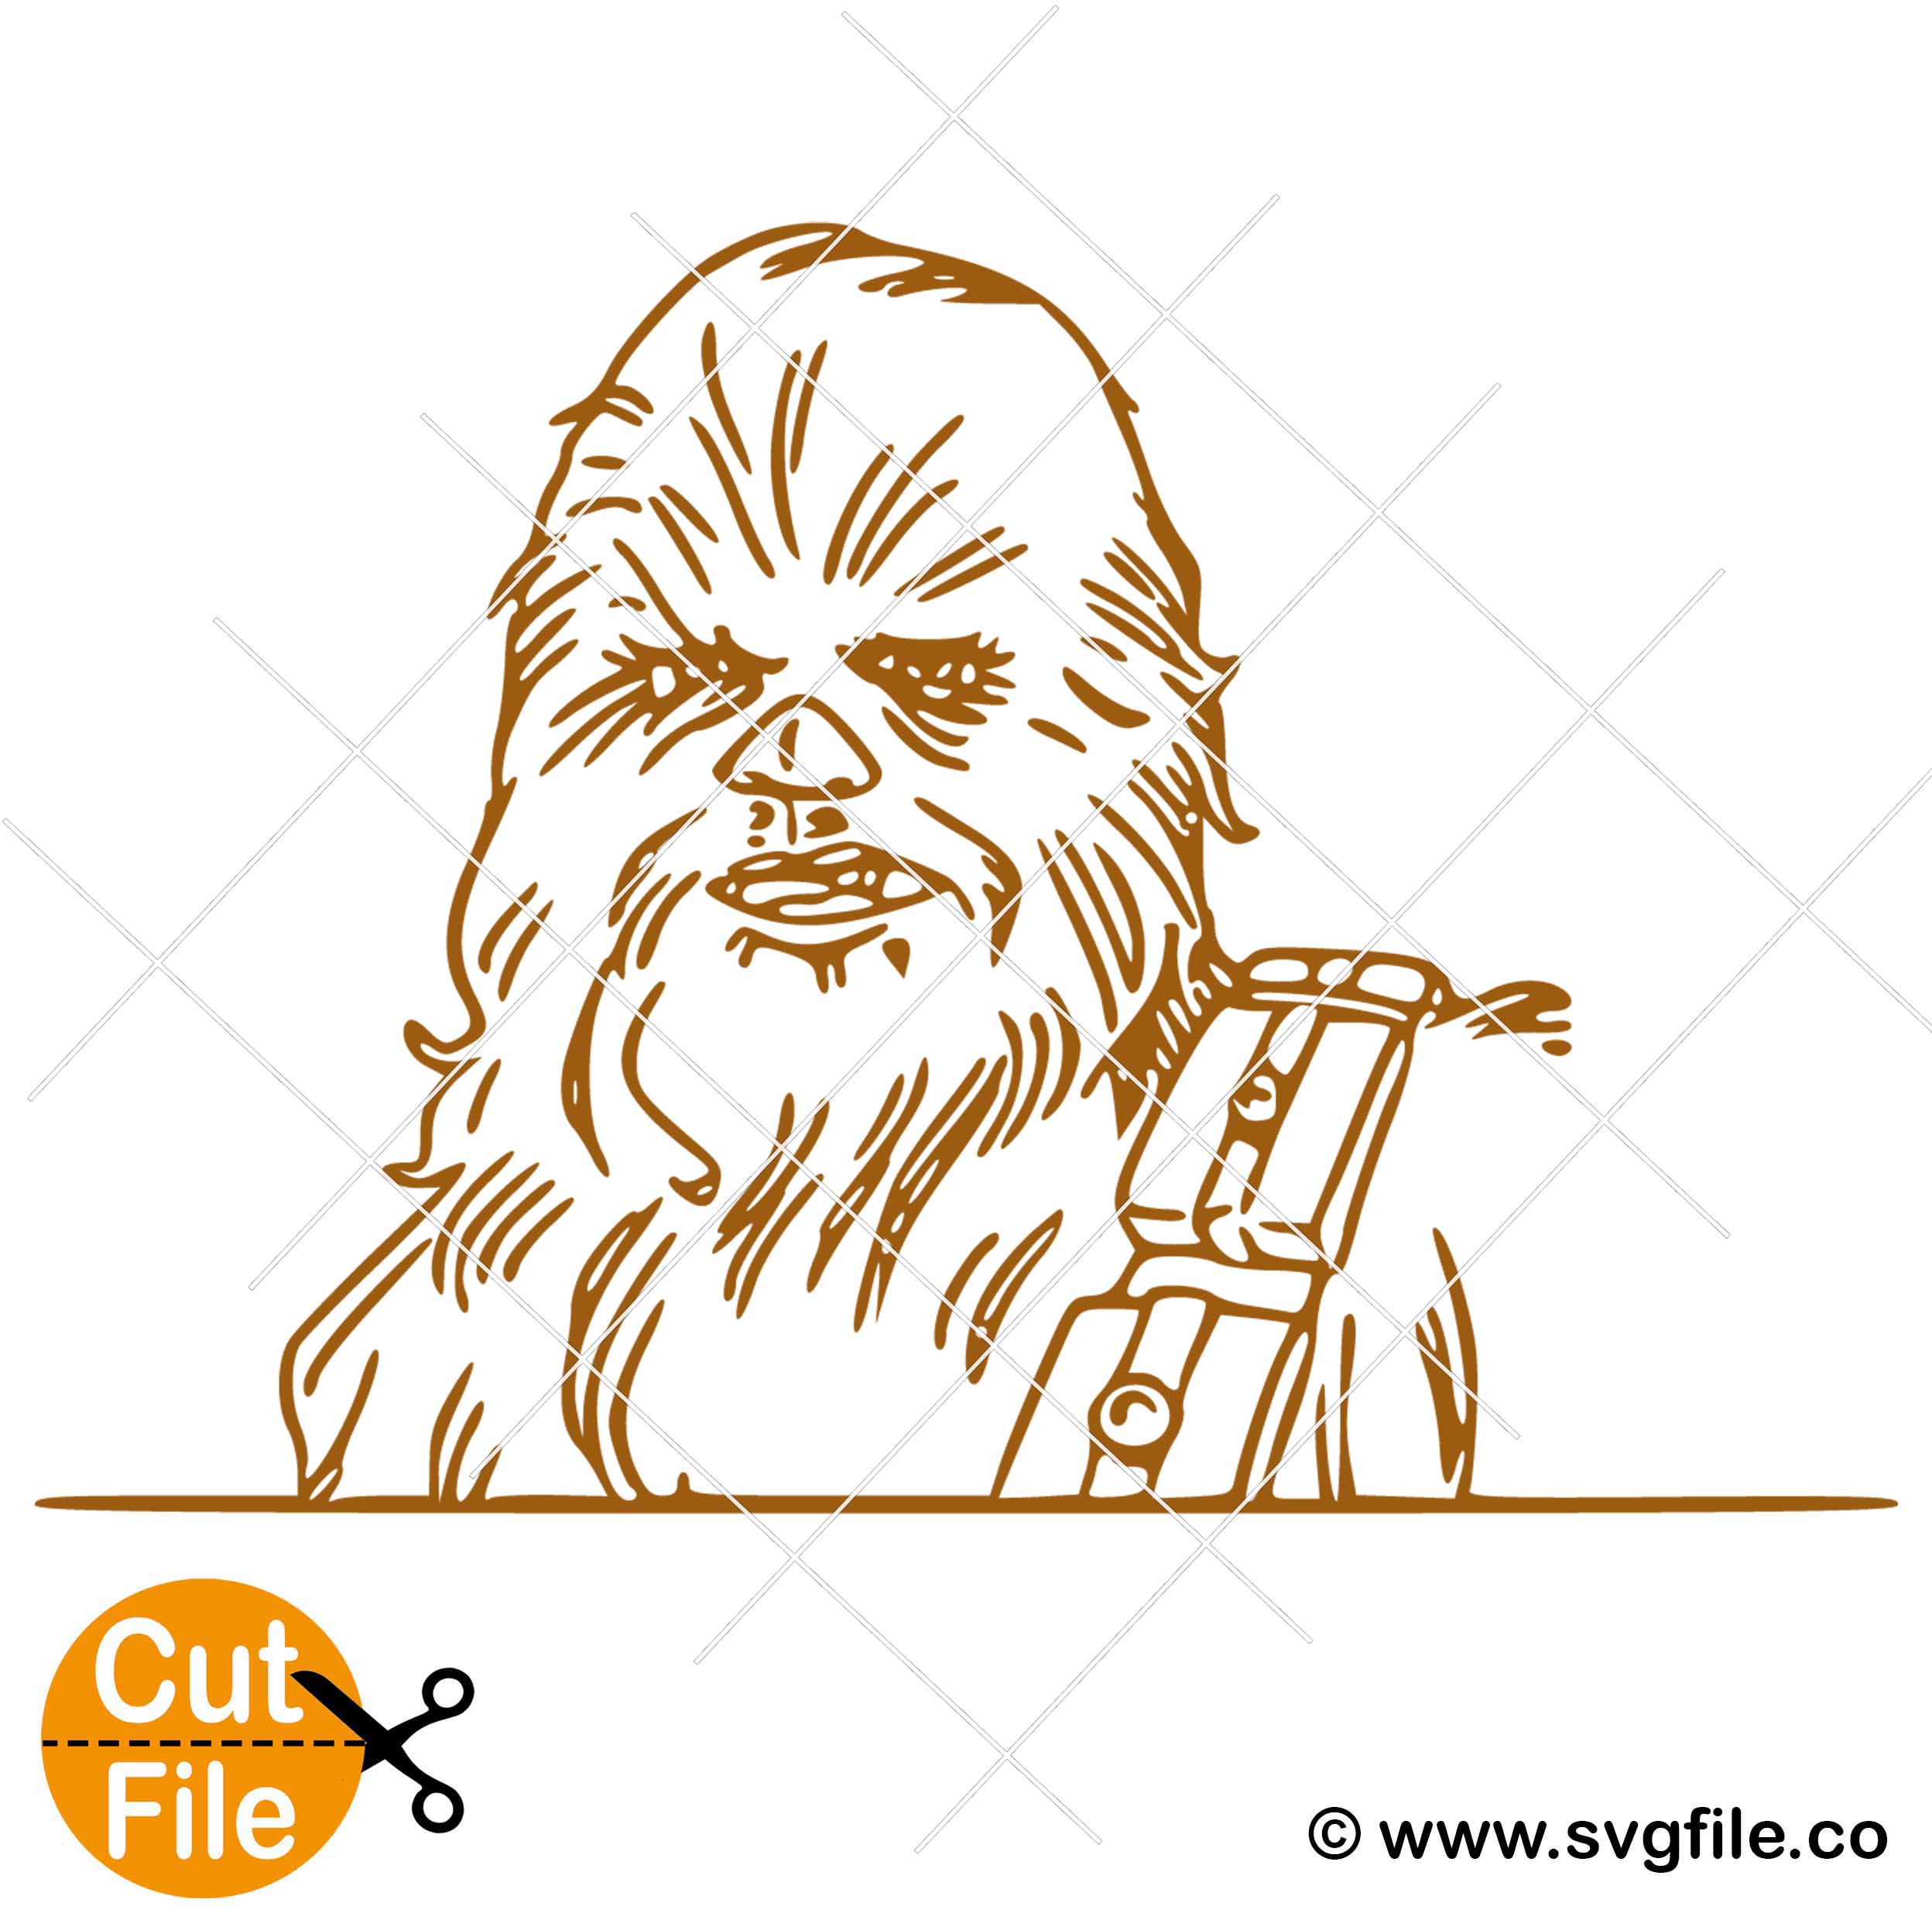 Chewbacca PNG Images, Chewbacca Clipart Free Download - Clip Art Library